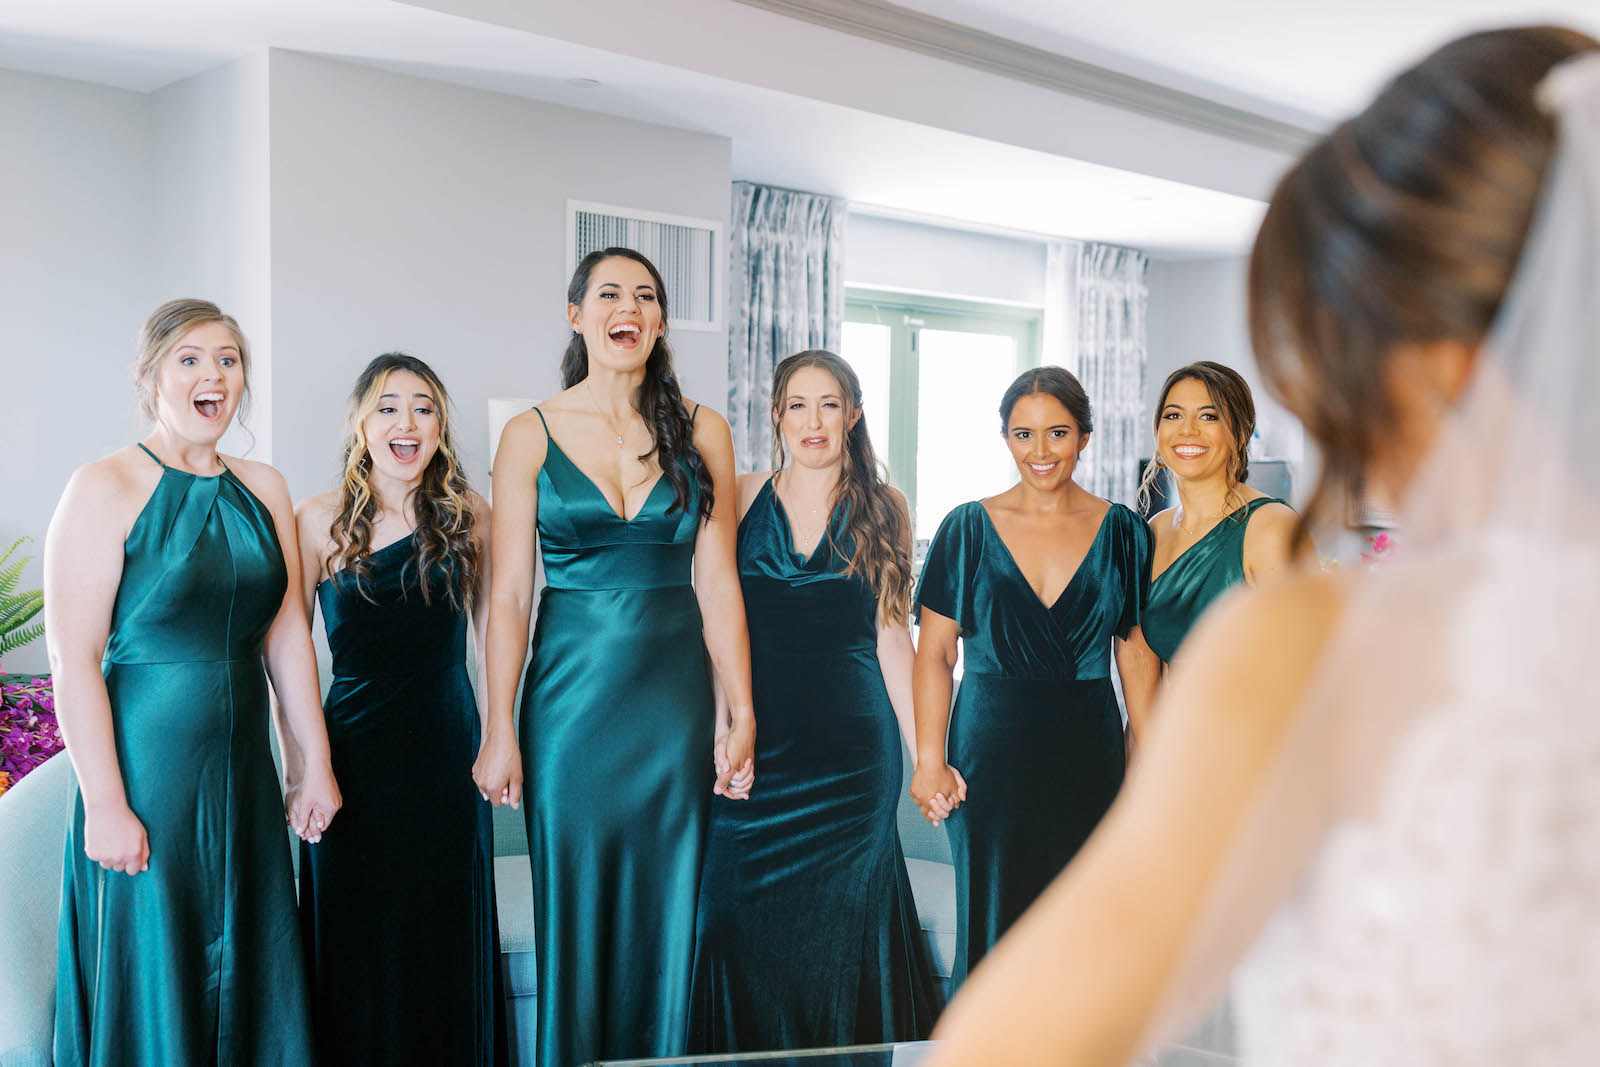 Bride and Bridesmaids First Look Wedding Portrait | Bridesmaids in Emerald Green Mix and Match Satin Floor Length Dresses